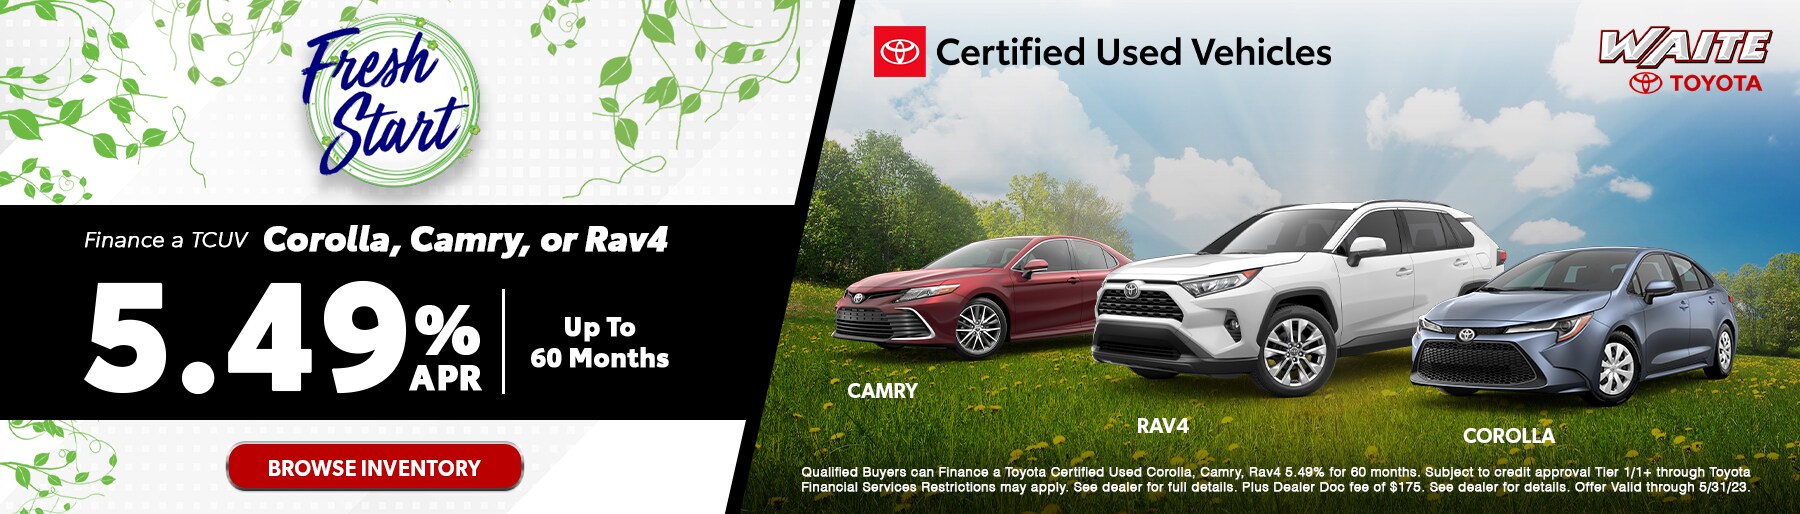 Certified Used Vehicles | Corolla, Camry, or Rav4